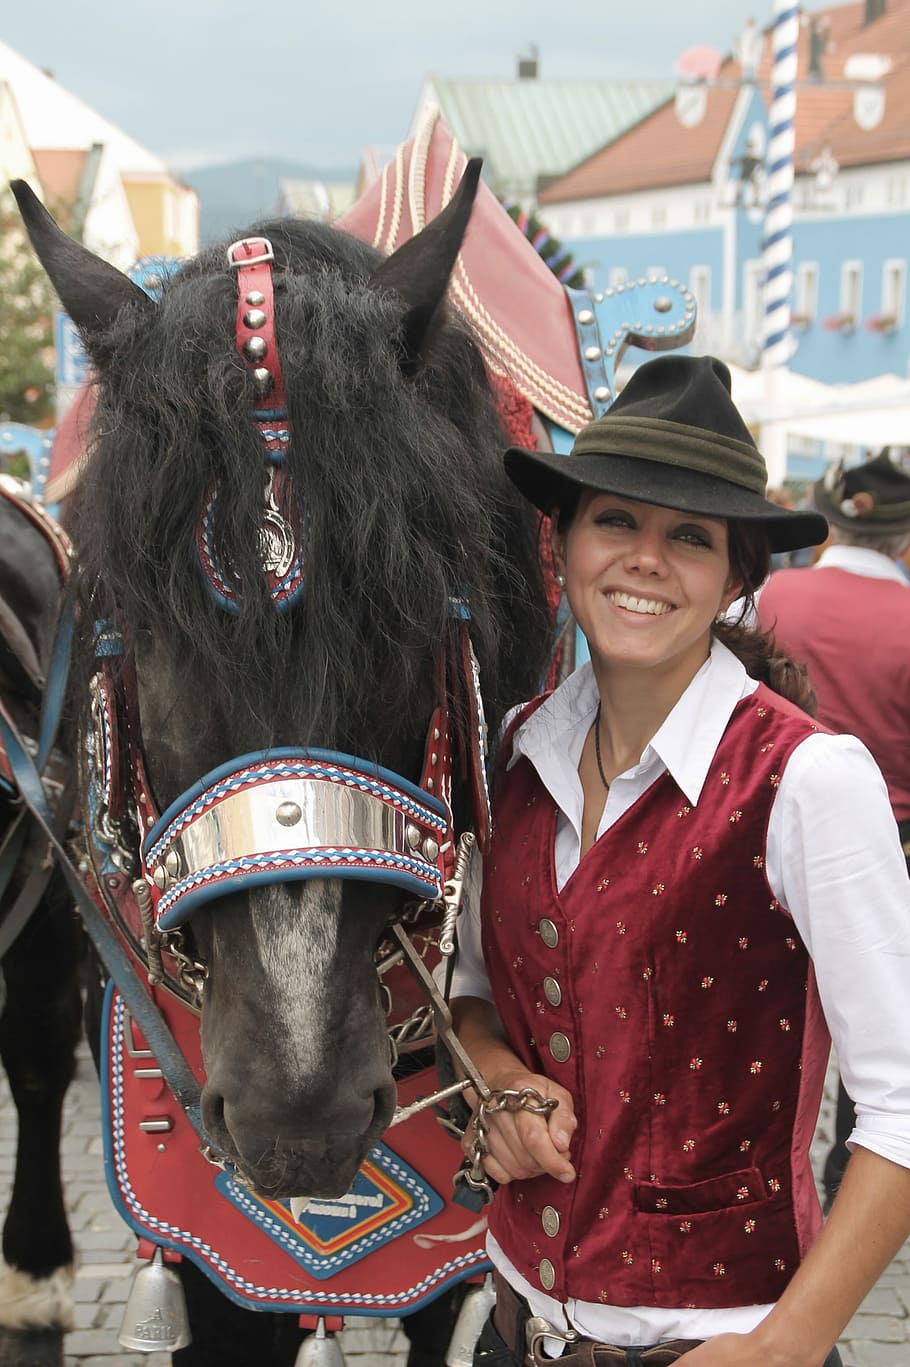 Ross, Day, Waldkirchen, Woman, ross day, brewery horse, traditional clothing, portrait, looking at camera, smiling